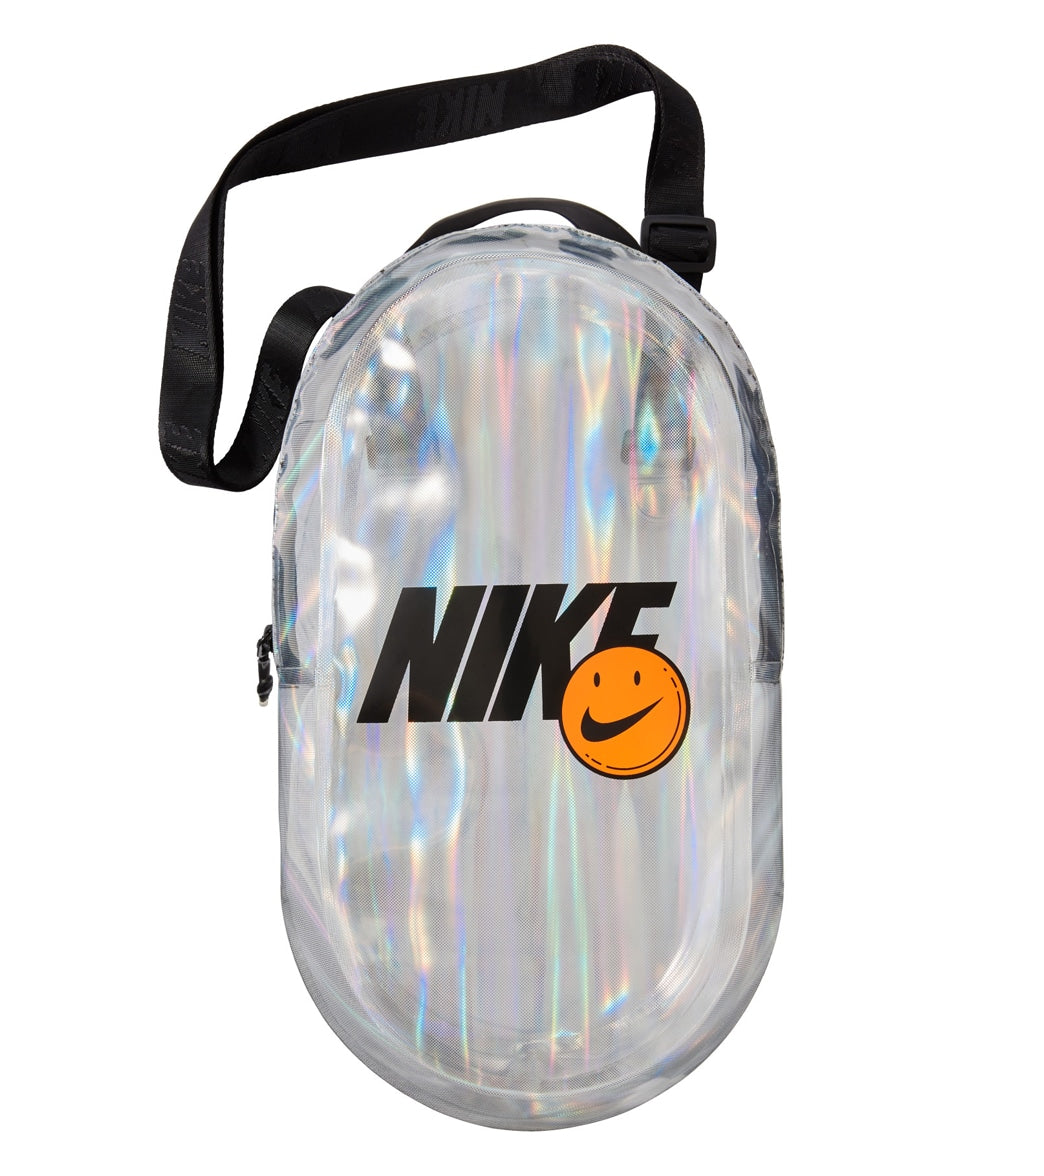 Nike Locker Bag 7L with Strap at SwimOutlet.com